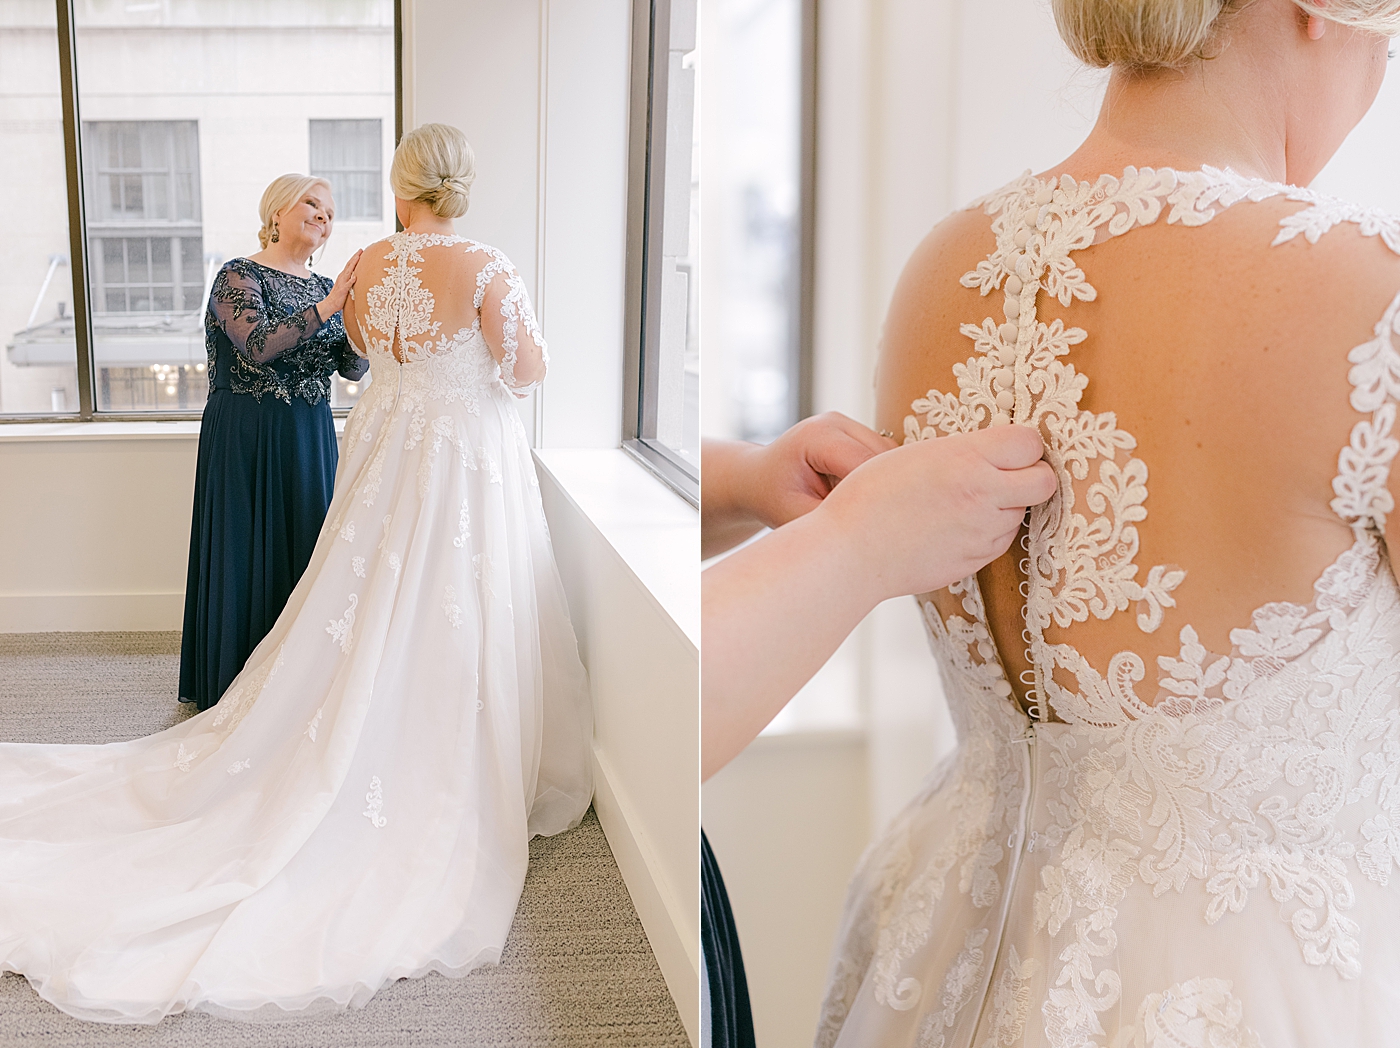 Mother of the bride buttoning the brides dress | Photo by Hope Helmuth Photography